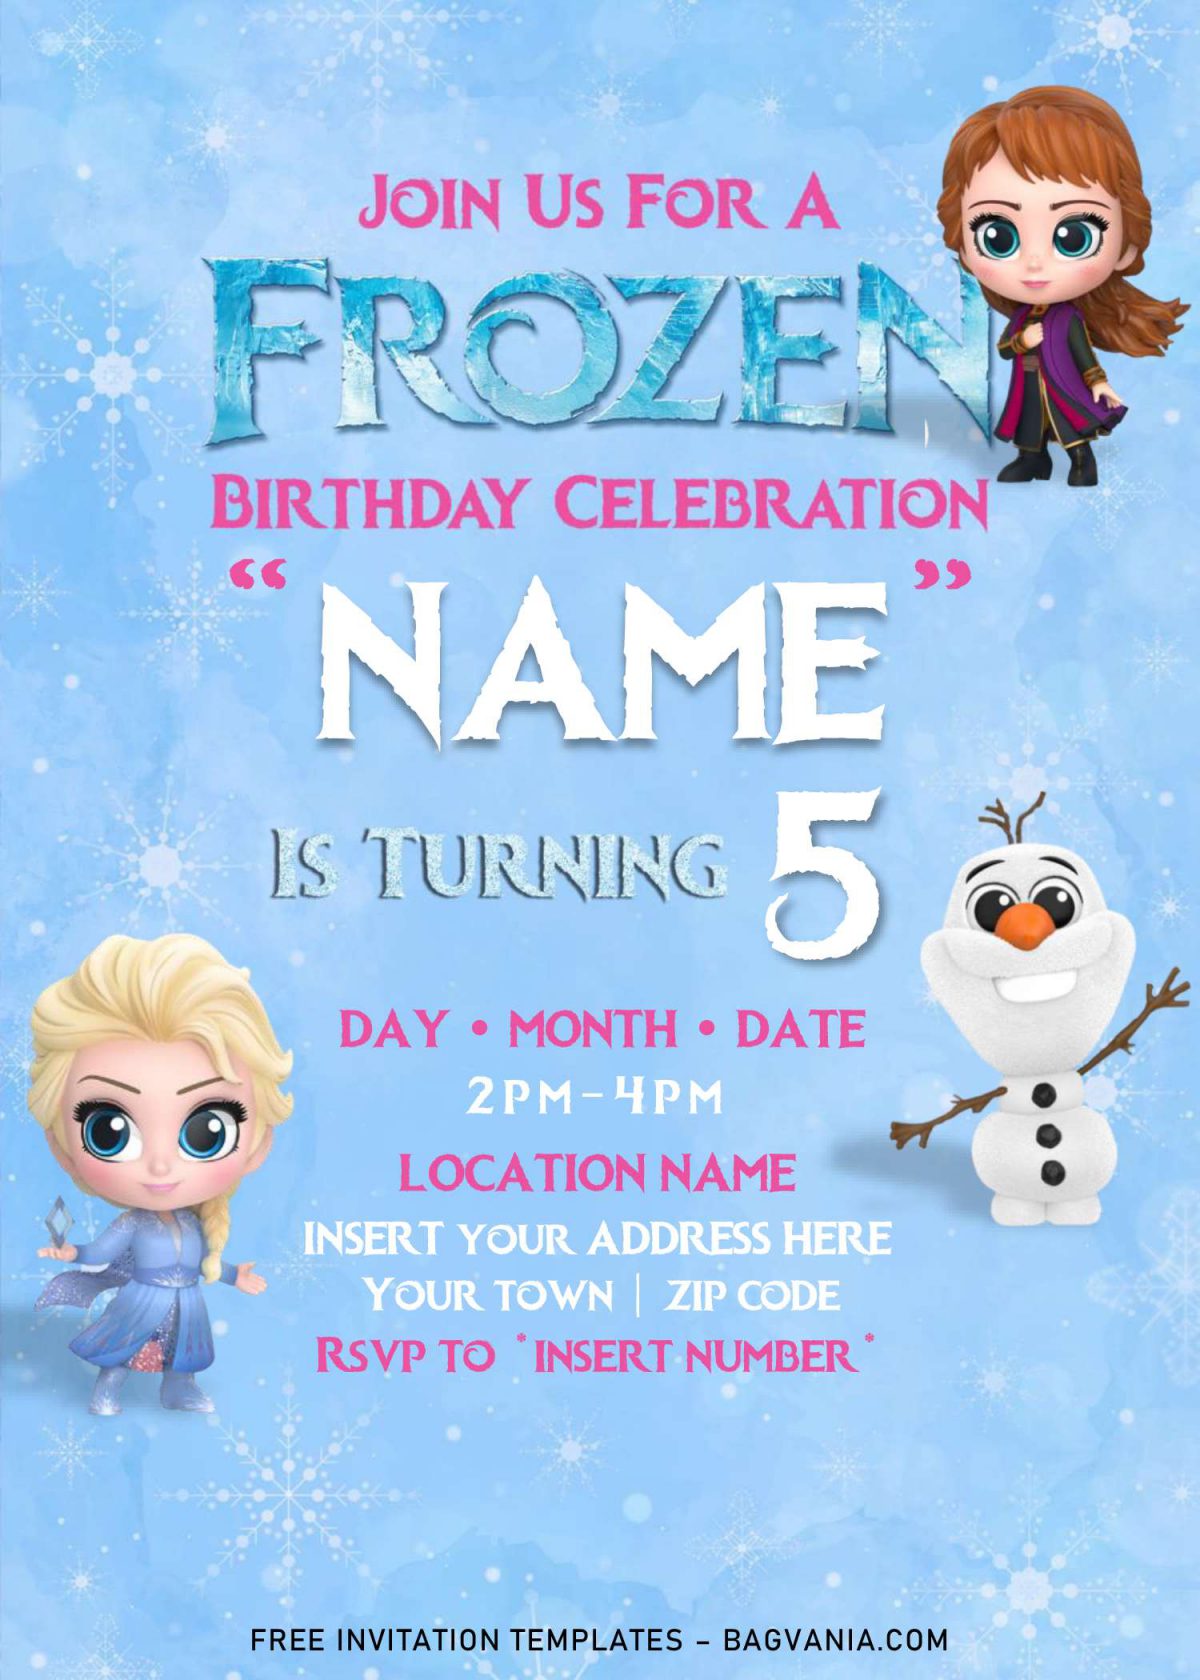 Free Frozen Birthday Invitation Templates For Word and has Chibi Olaf and Frozen's logo